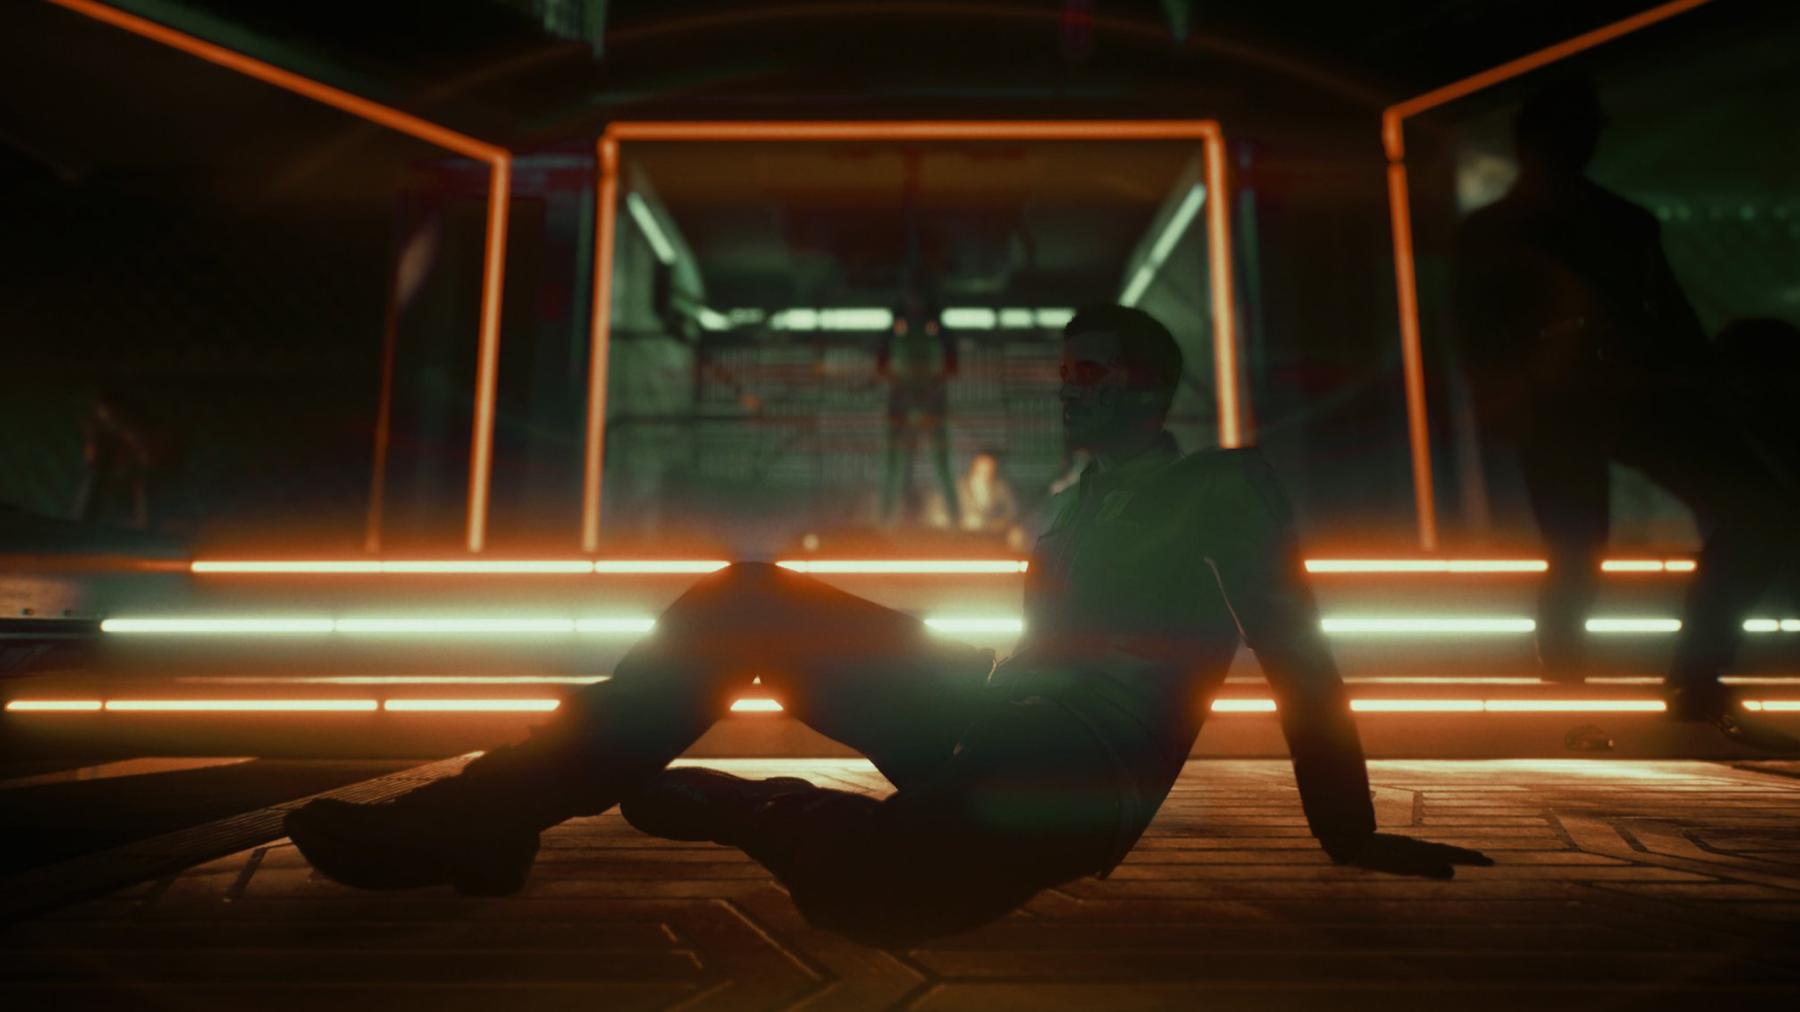 Oh no, I’ve found out how to use photo mode in cyberpunk 